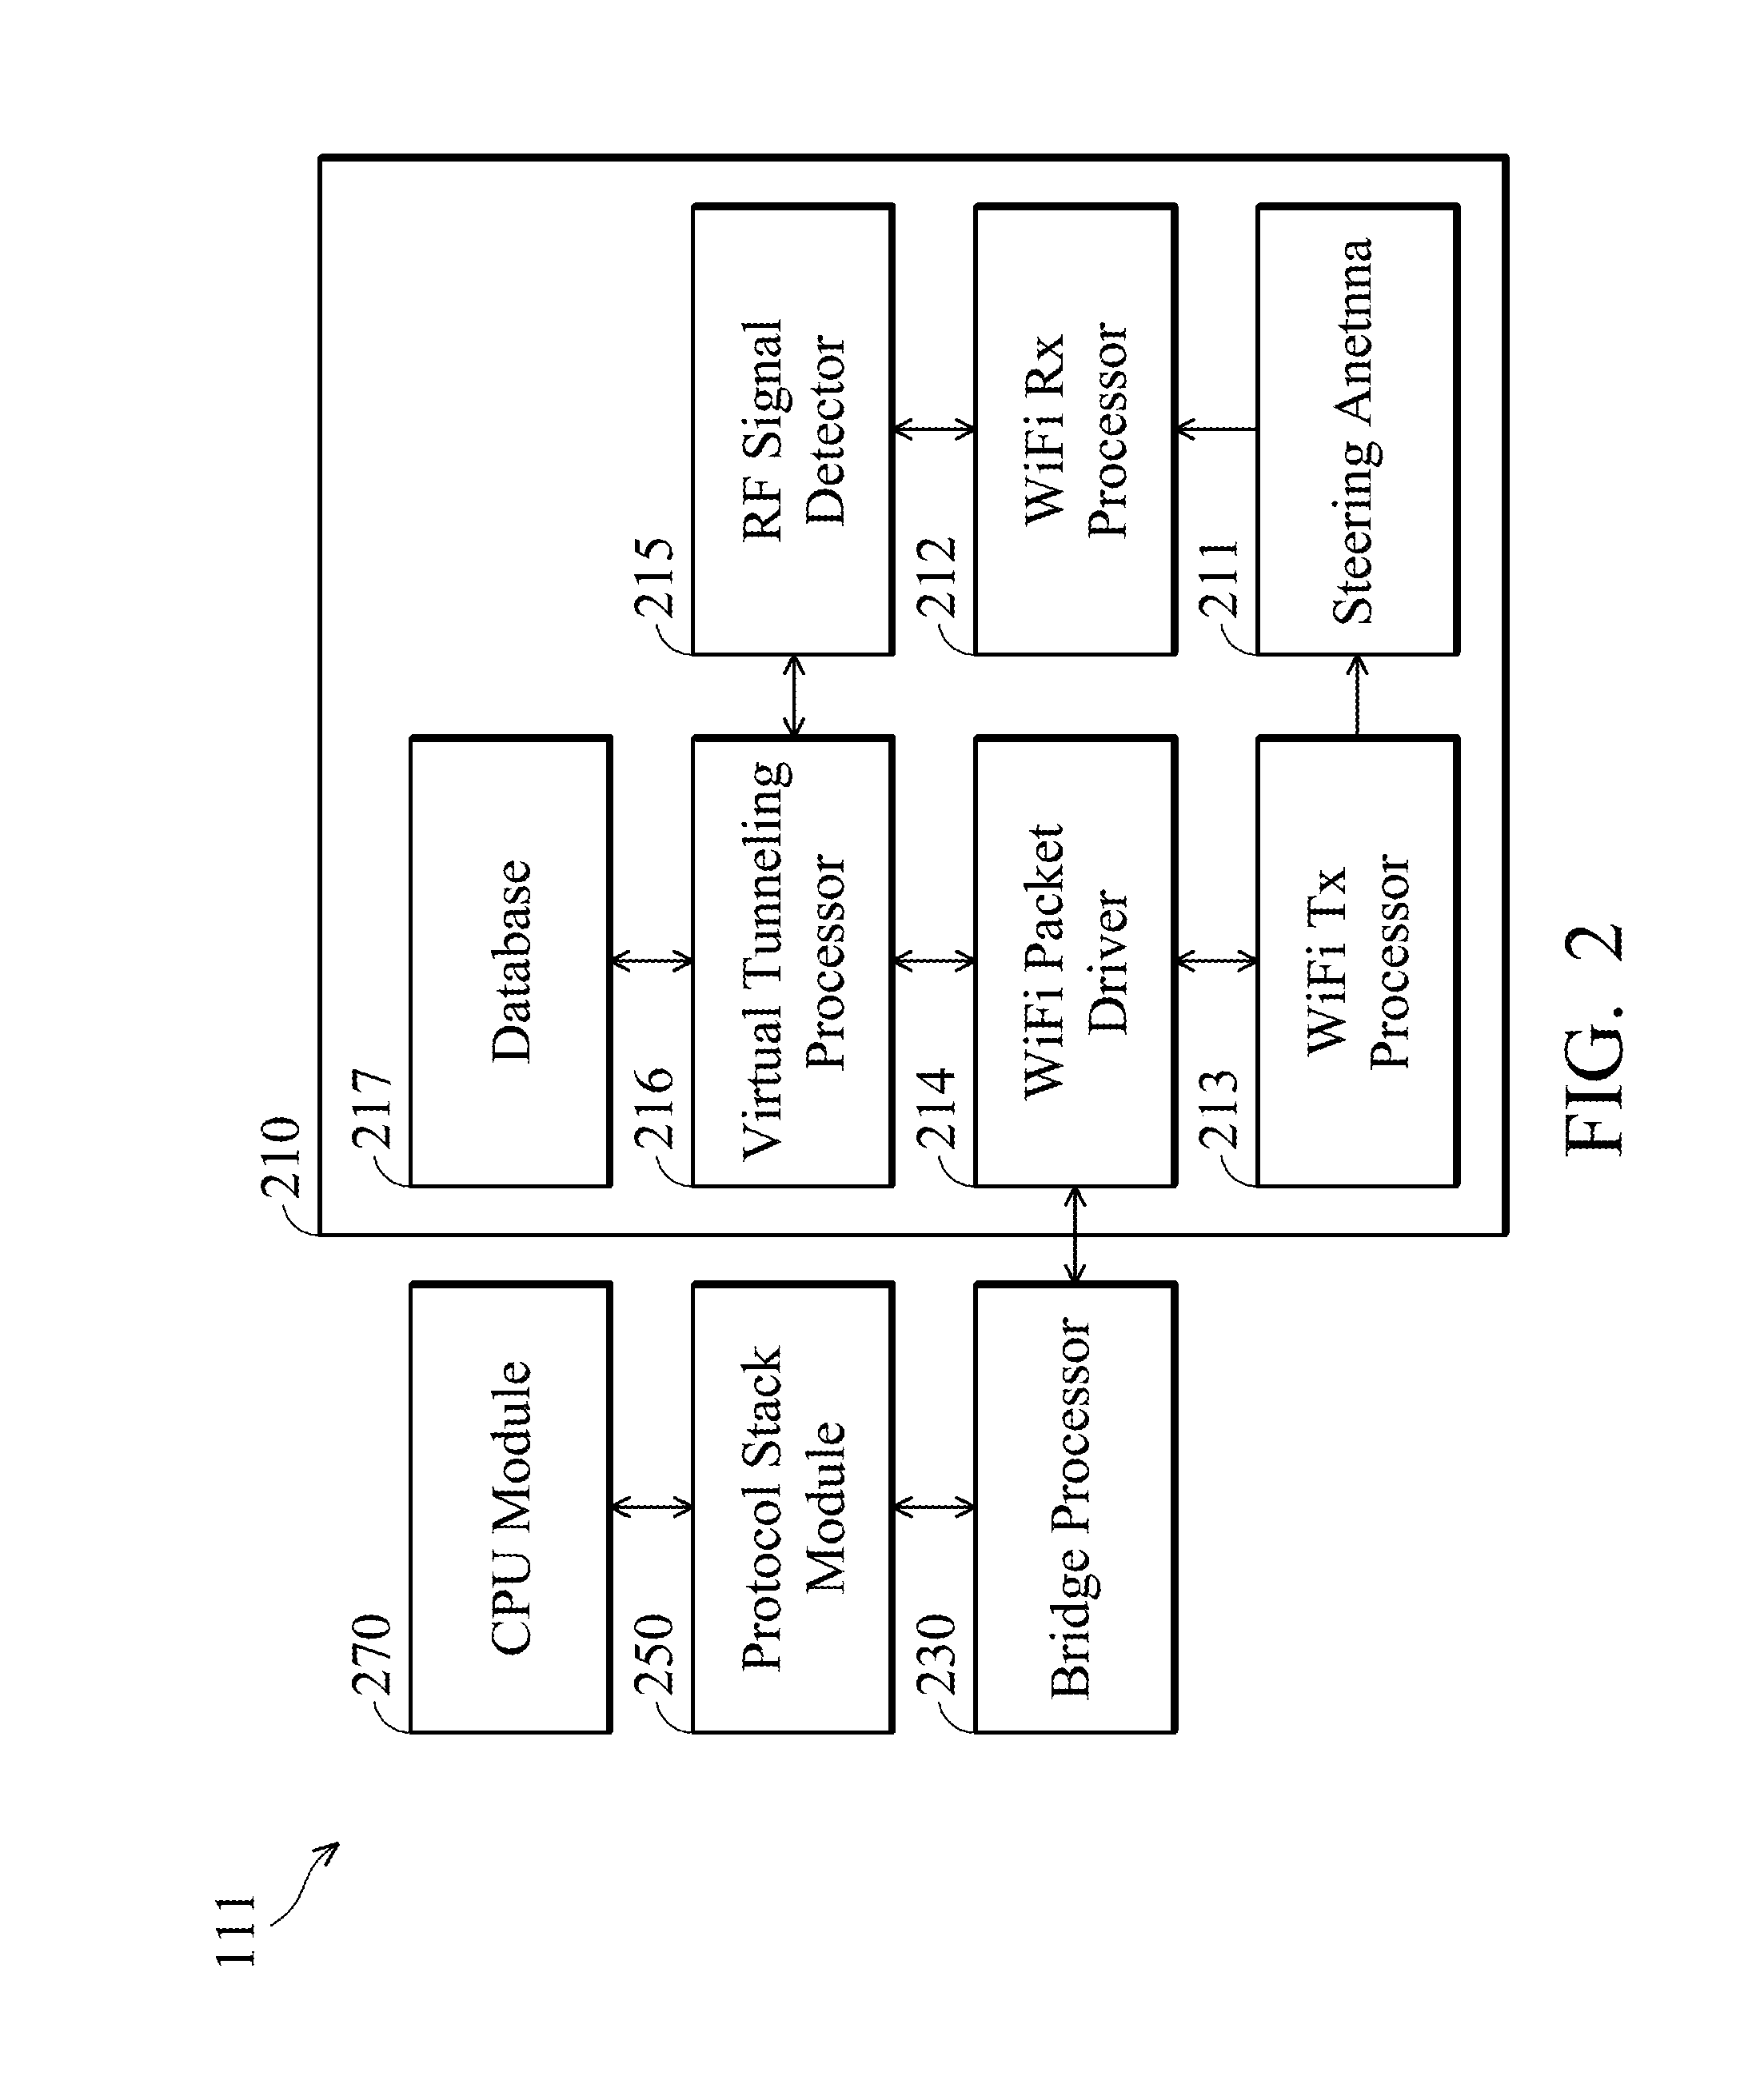 Methods for controlling antennas and apparatuses using the same